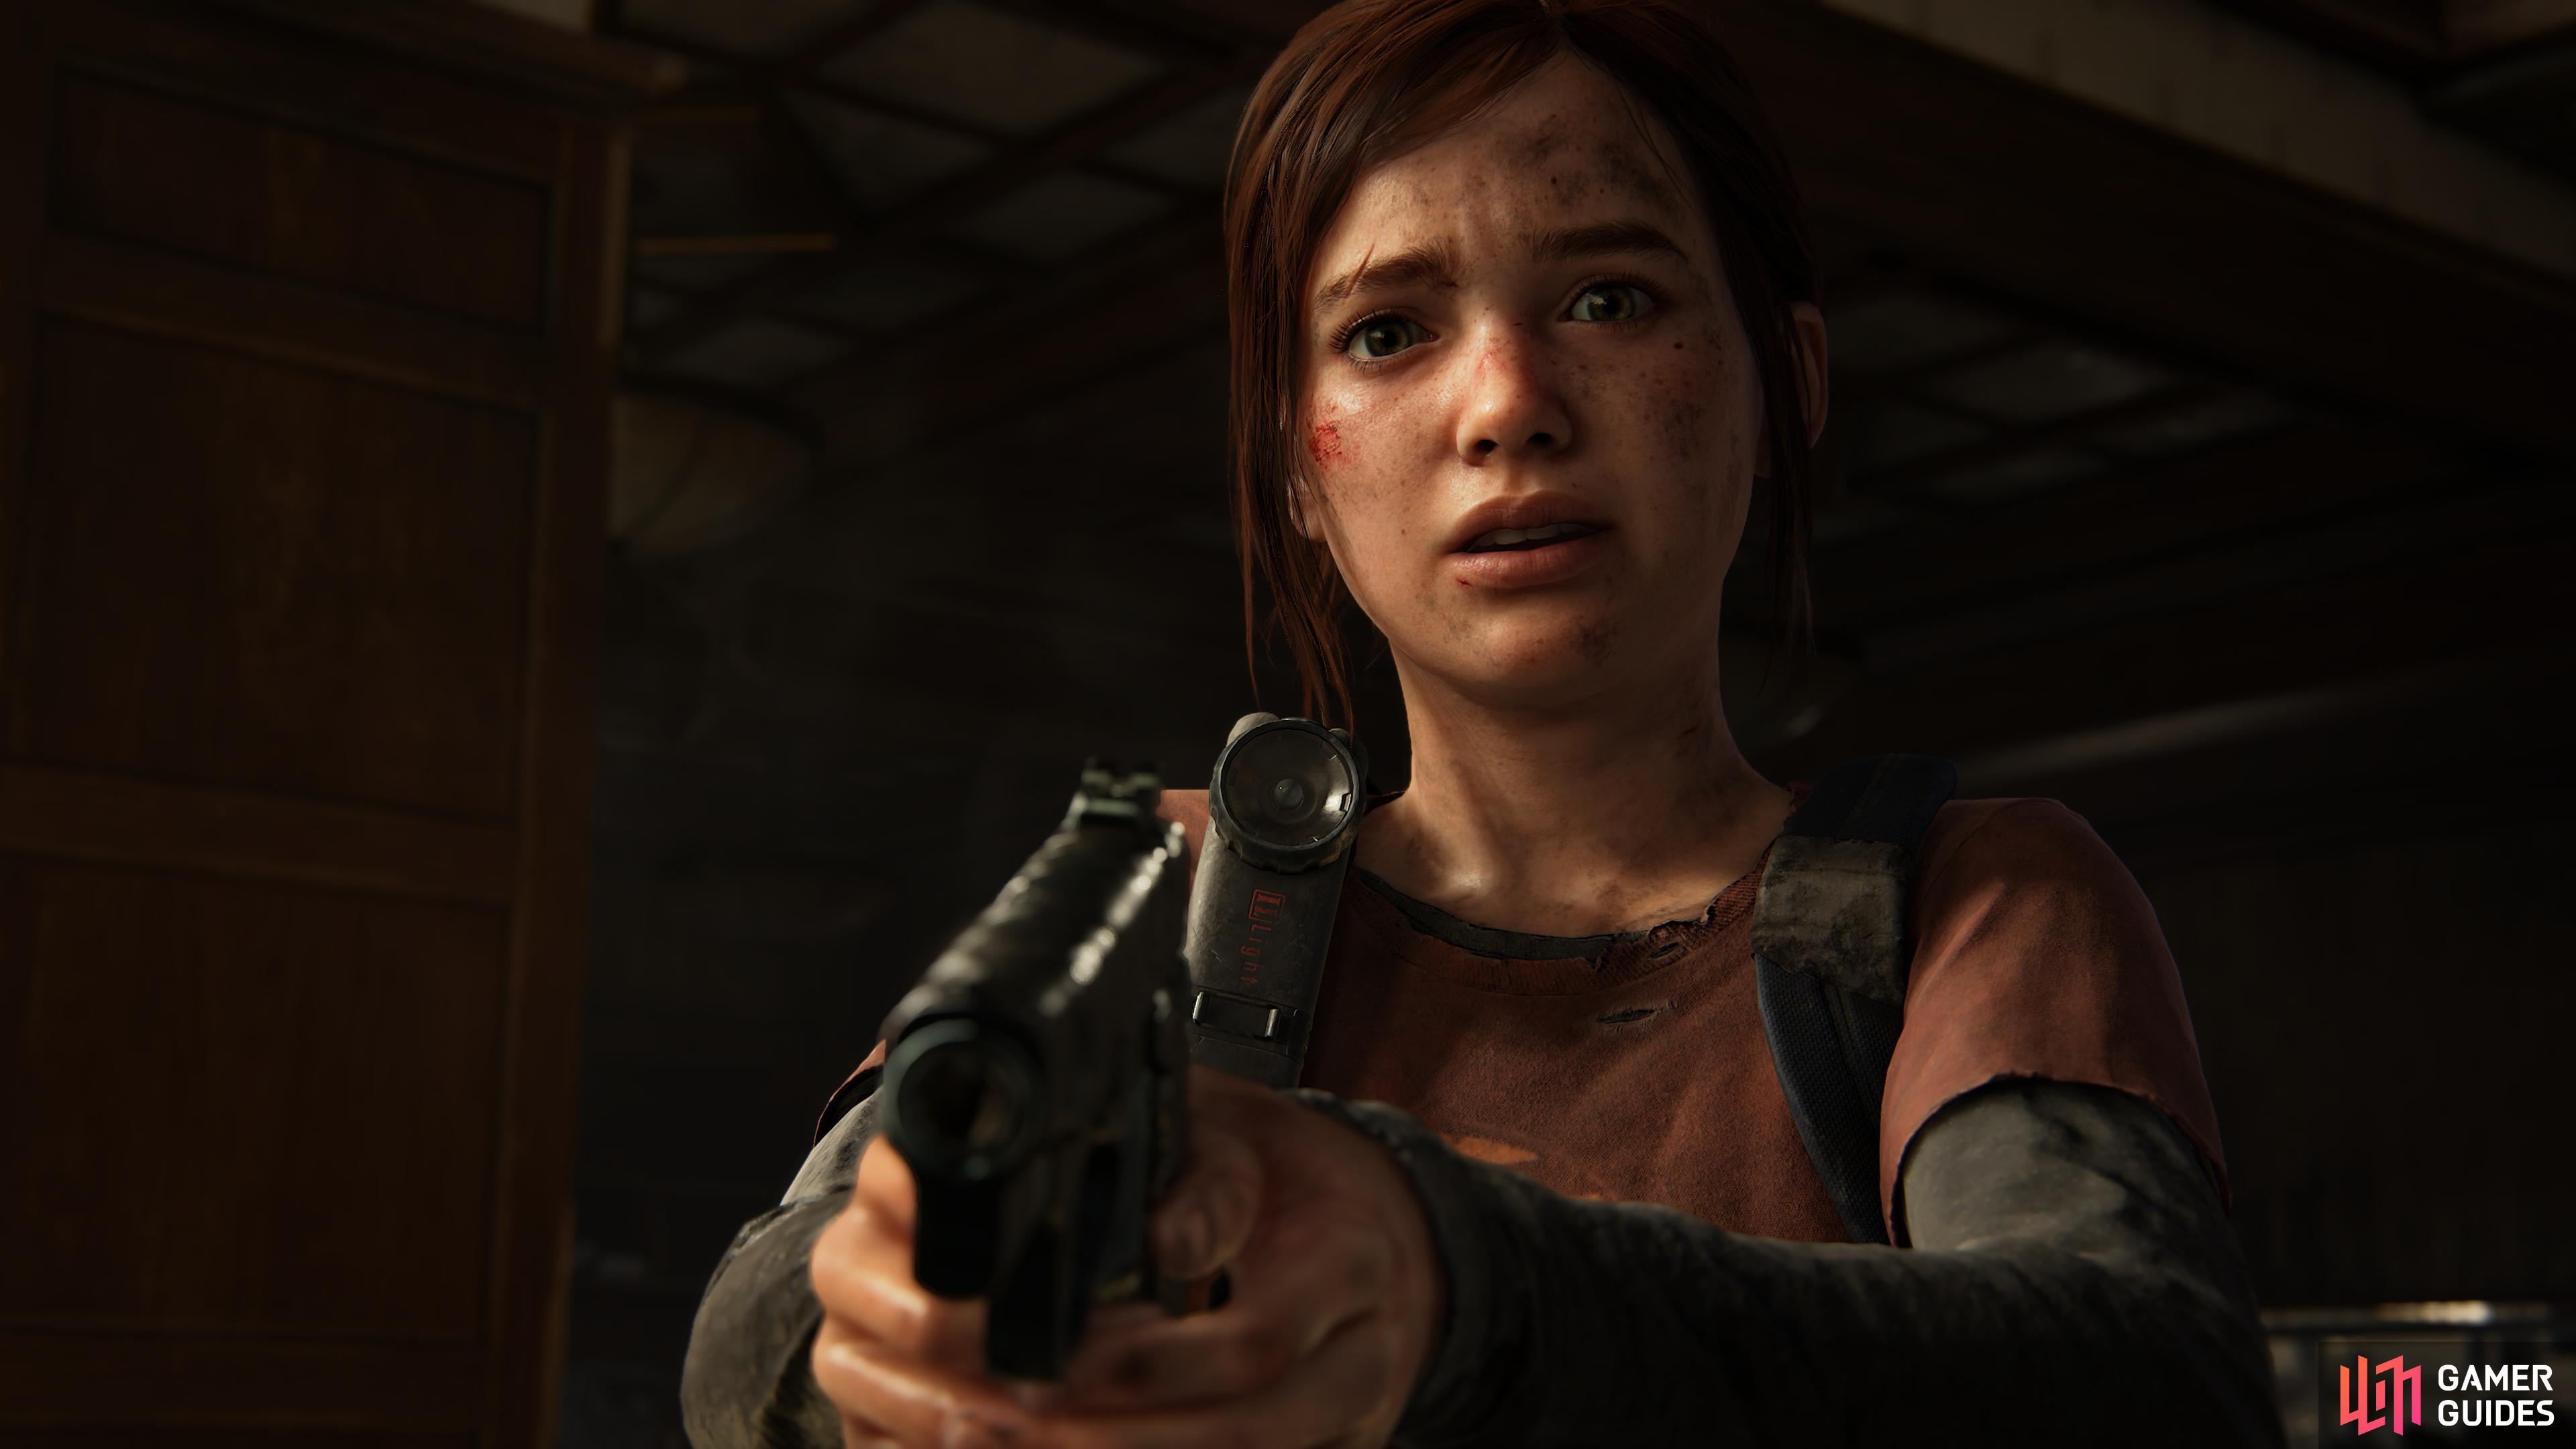 Ellie is in shock after killing somebody.